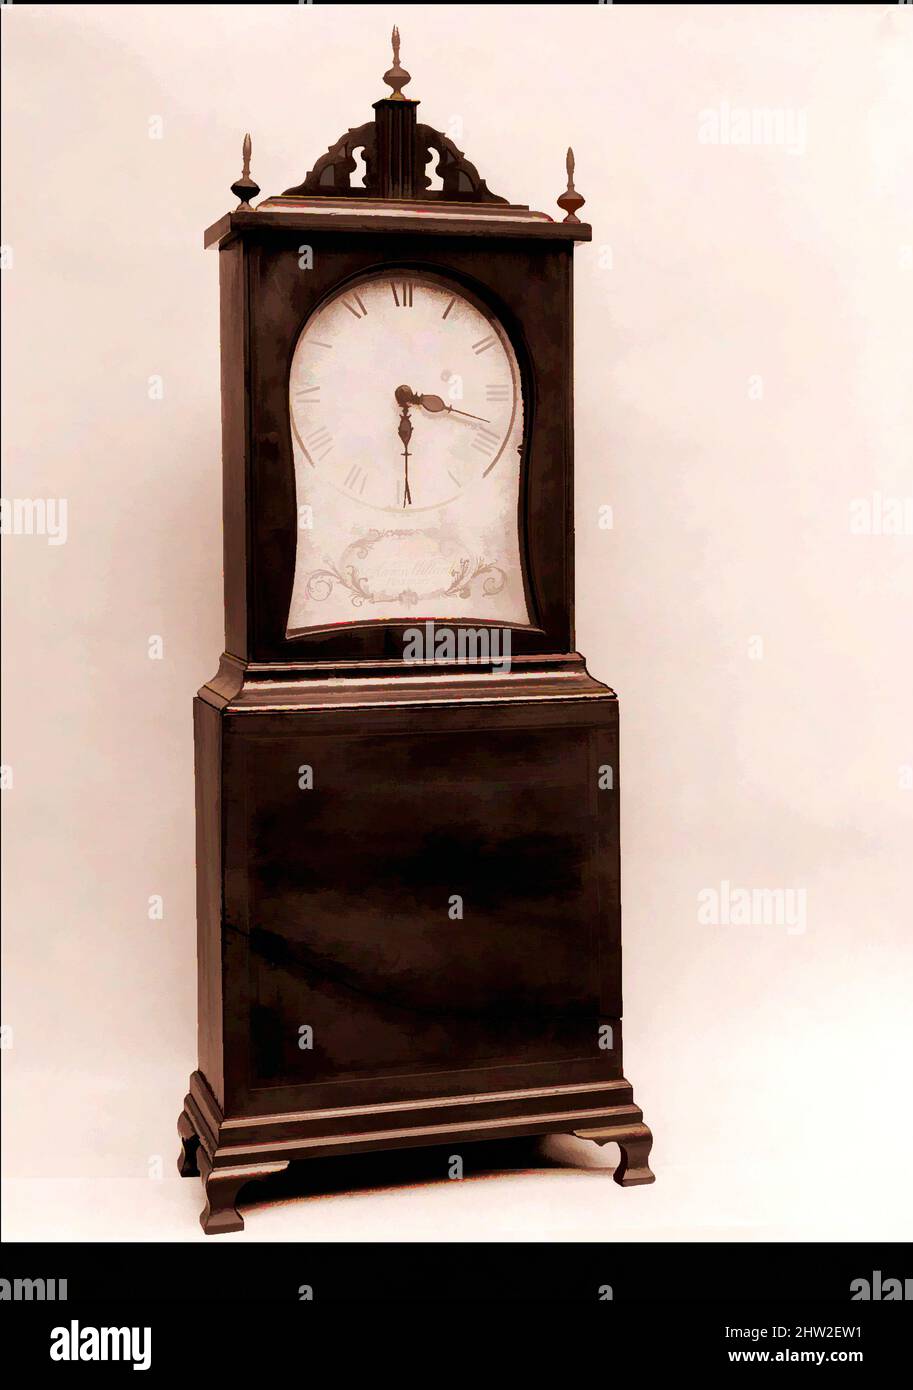 Art inspired by Shelf Clock, 1805–9, Made in Roxbury, Massachusetts, United States, American, Mahogany, white pine, H. 36 in. (91.4 cm), Furniture, Aaron Willard (1757–1844), Aaron Willard Jr. (1783–1864, Classic works modernized by Artotop with a splash of modernity. Shapes, color and value, eye-catching visual impact on art. Emotions through freedom of artworks in a contemporary way. A timeless message pursuing a wildly creative new direction. Artists turning to the digital medium and creating the Artotop NFT Stock Photo